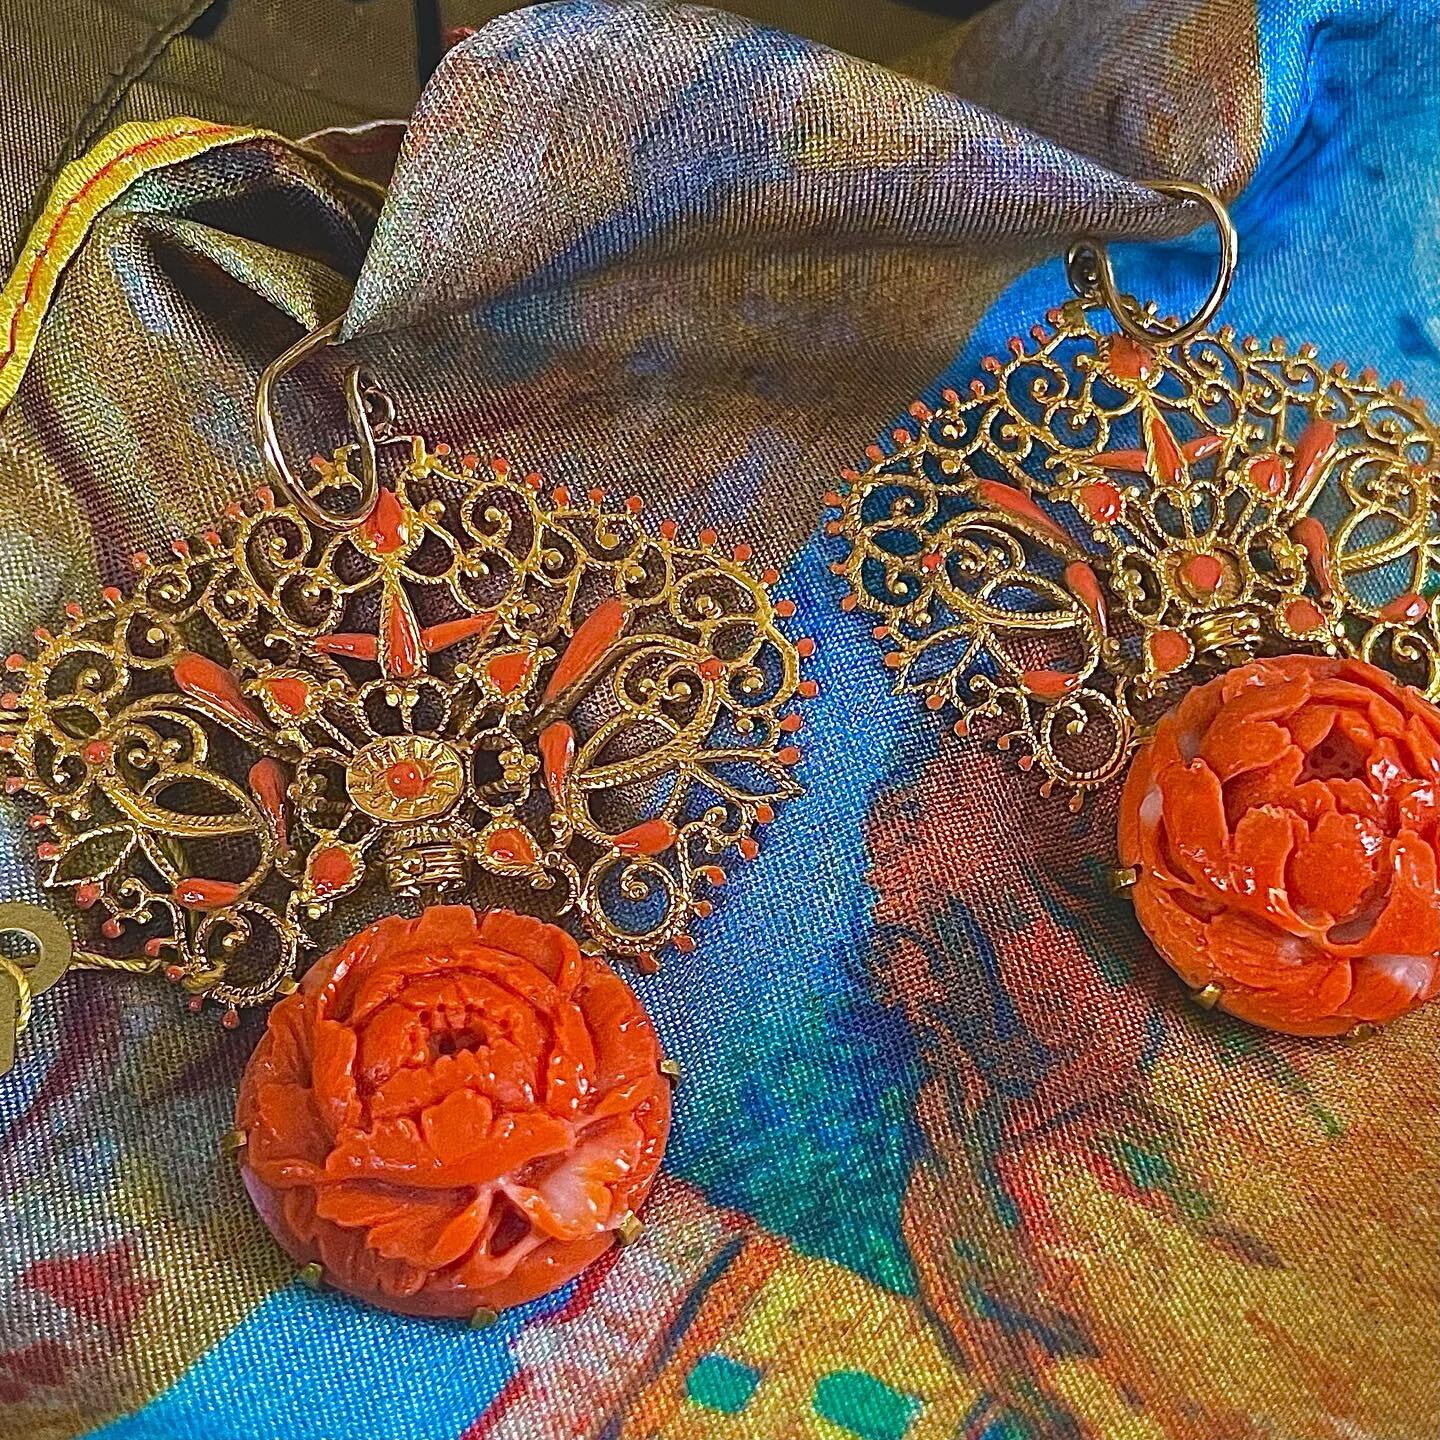 These extraordinary earrings were custom made to reflect the delicacy and richness of the gold in the tops highlighted by enamel in circling a beautifully carved coral flower. The two items of gold and coral offset each other and are rich, historic a